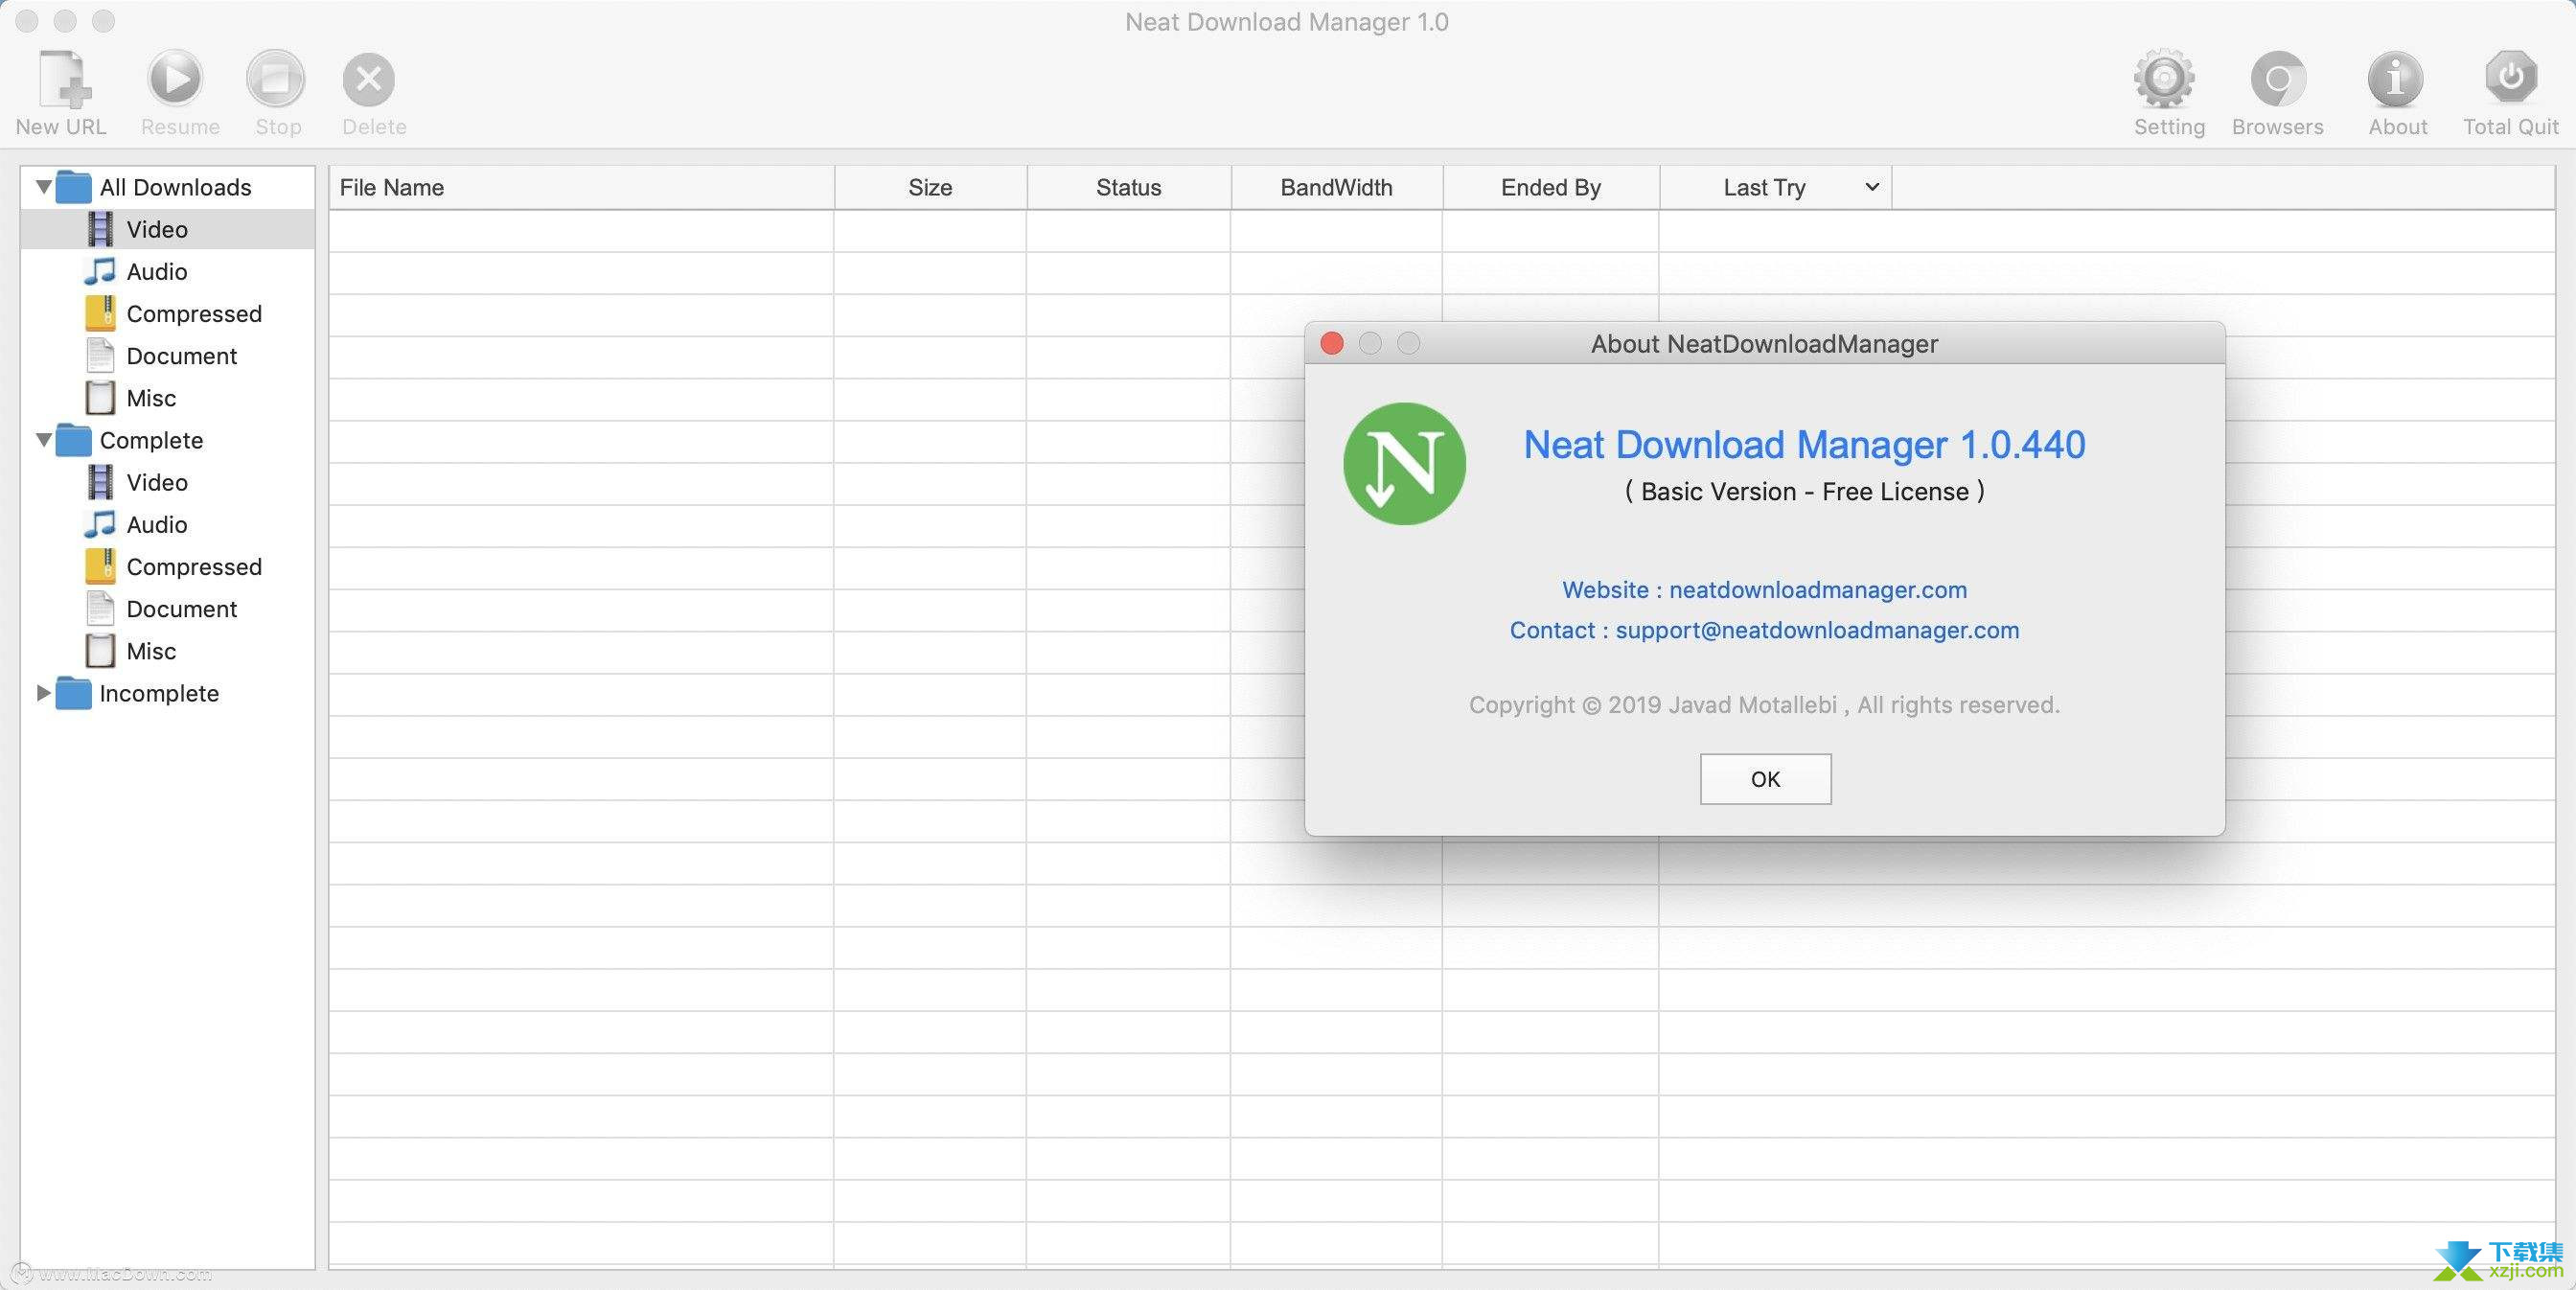 Neat Download Manager界面